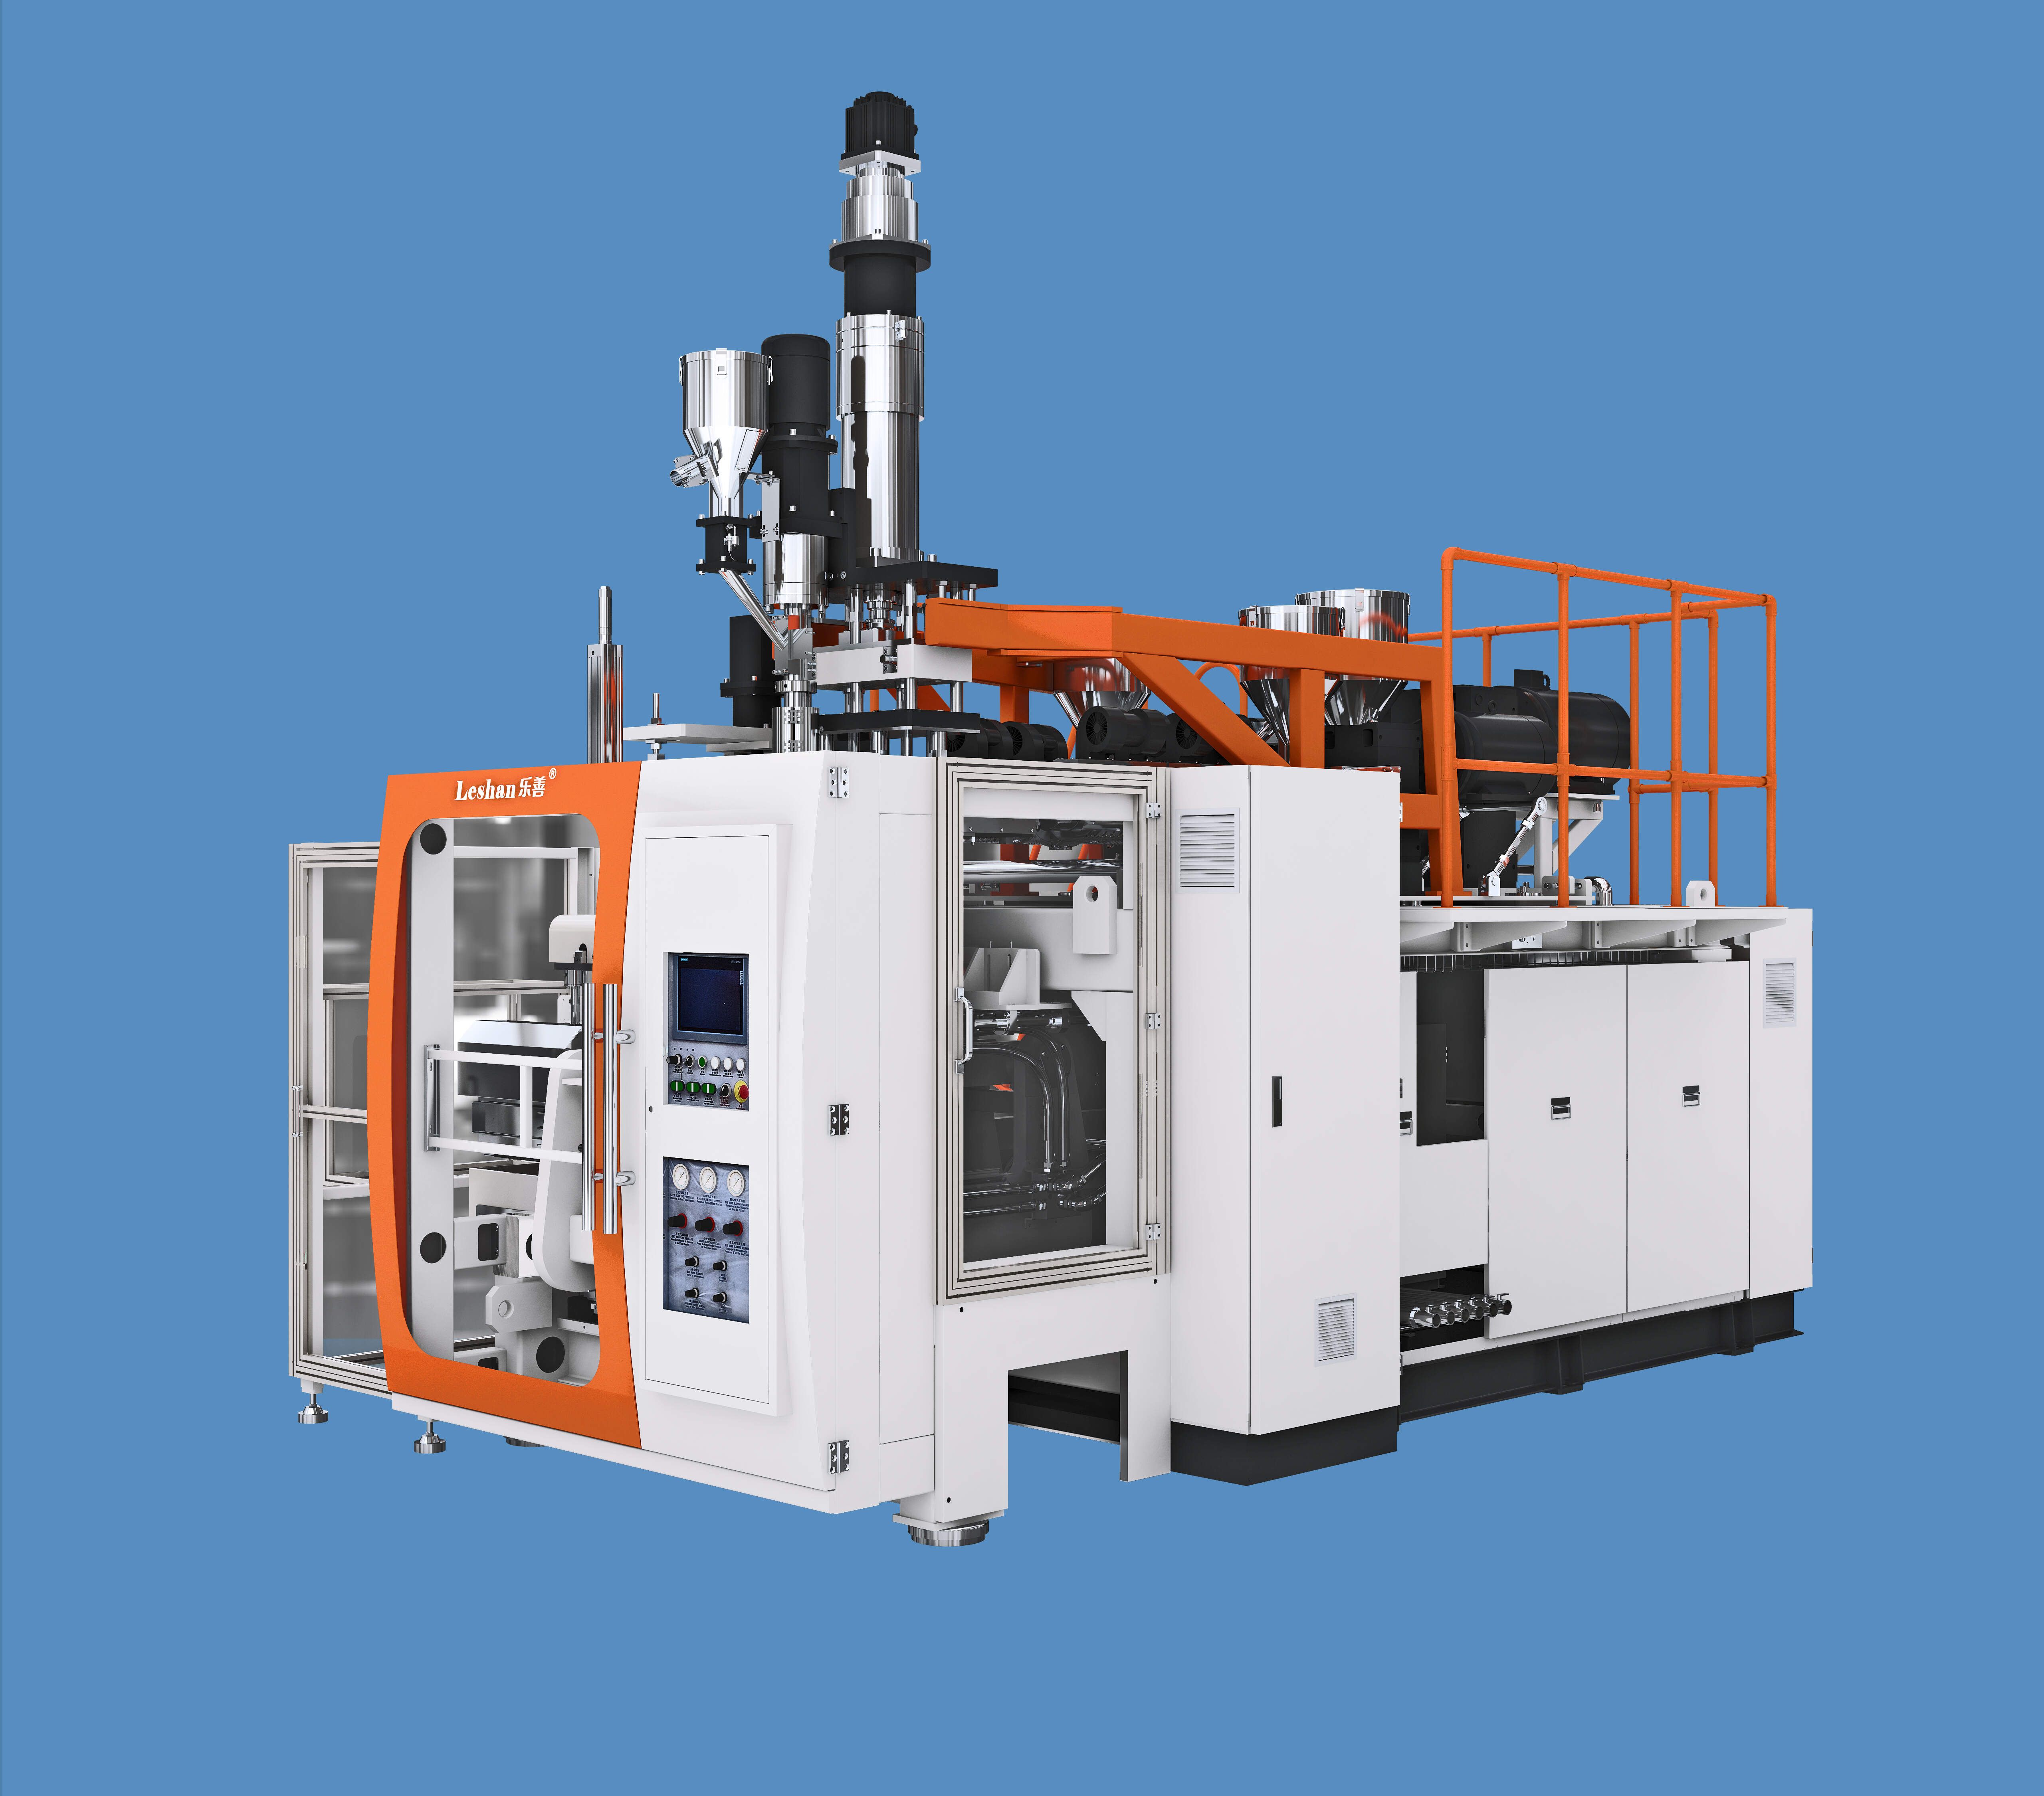 How to choose the mold head of a 2l bottle blow molding machine?